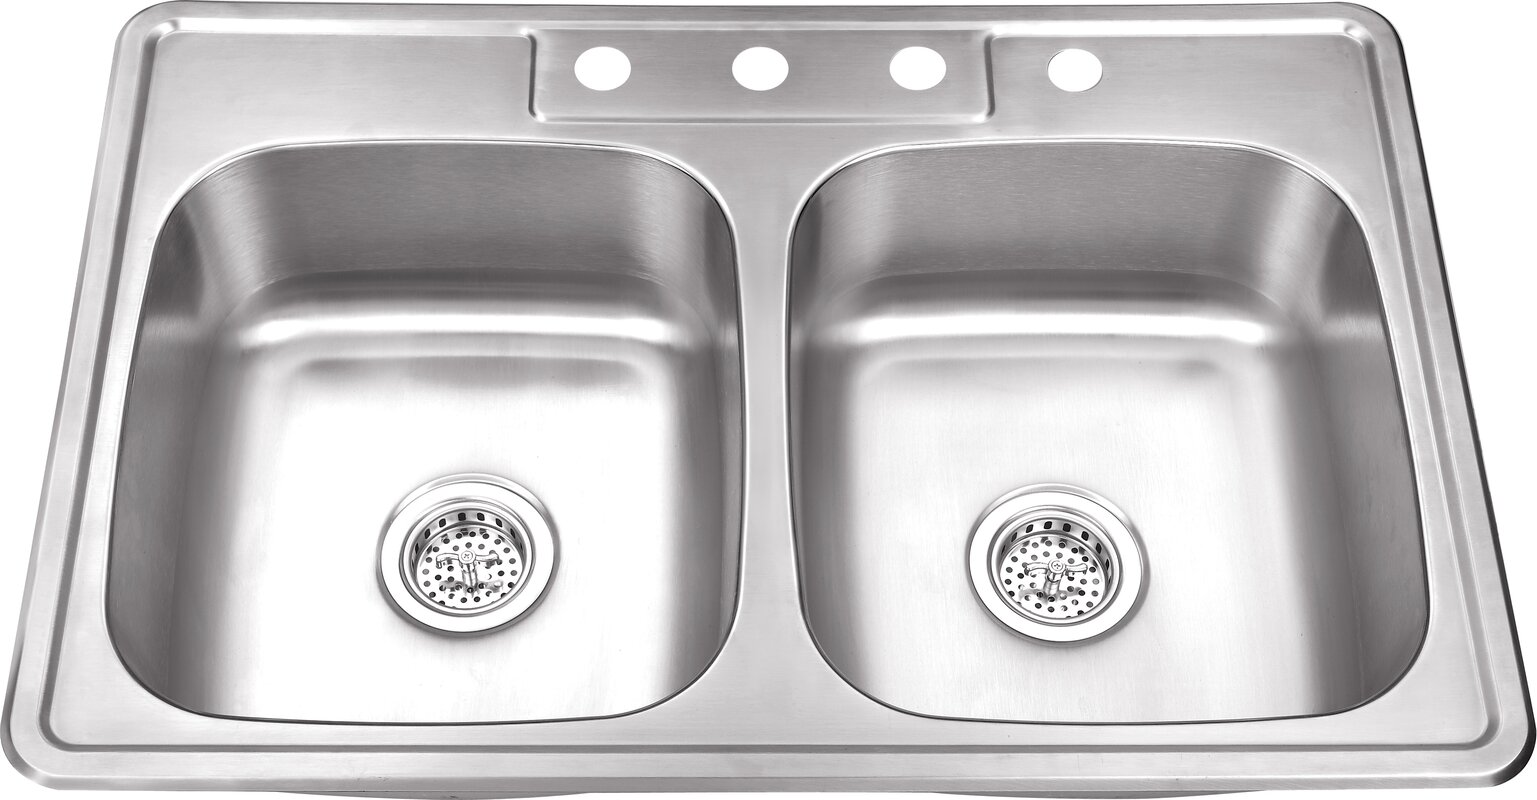 33 x 22 double bowl stainless steel kitchen sink